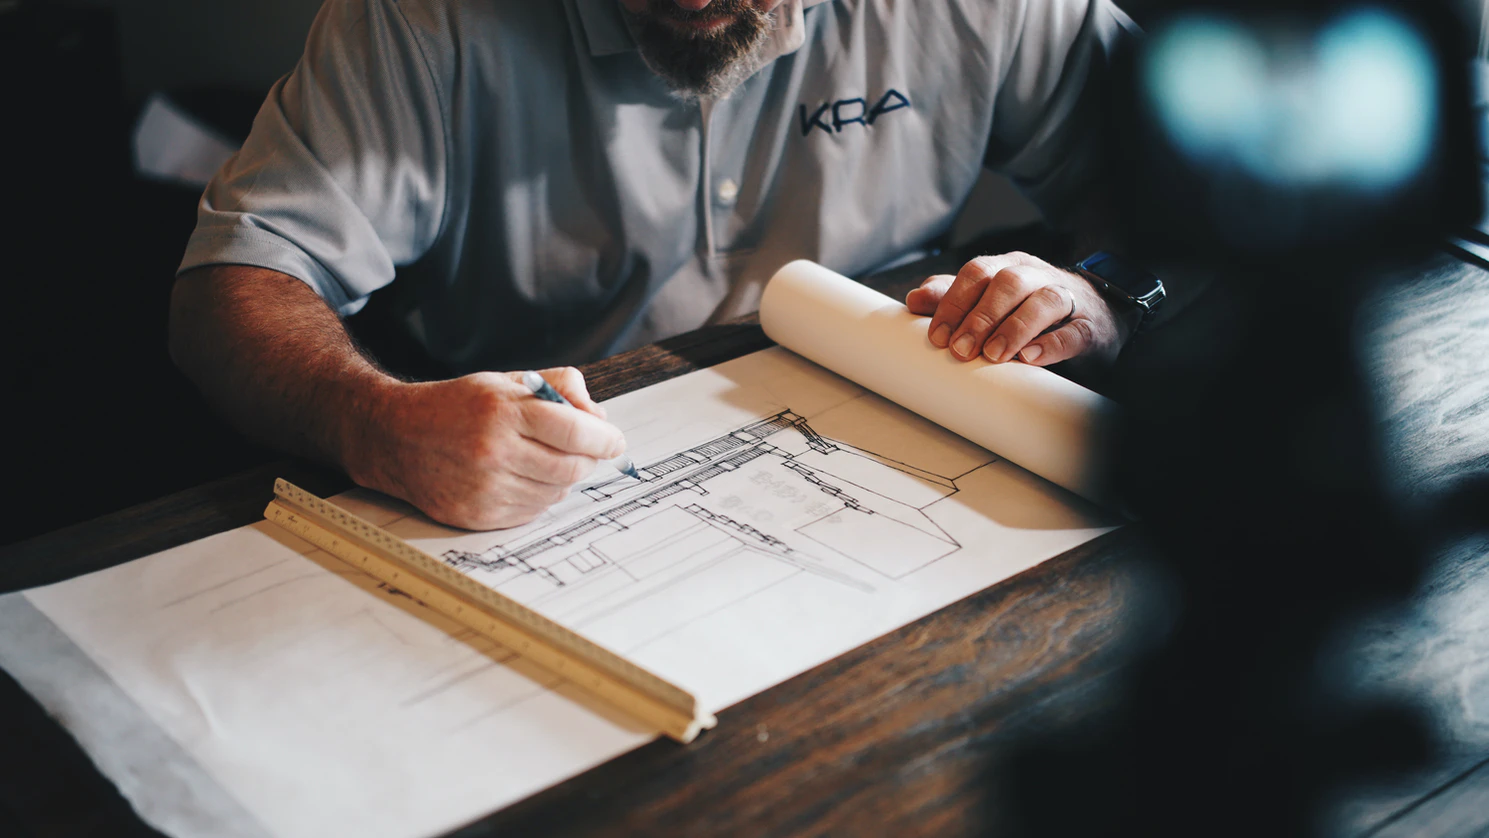 Man with a beard sitting at a wooden table with an architectural blueprint, pencil and a ruler